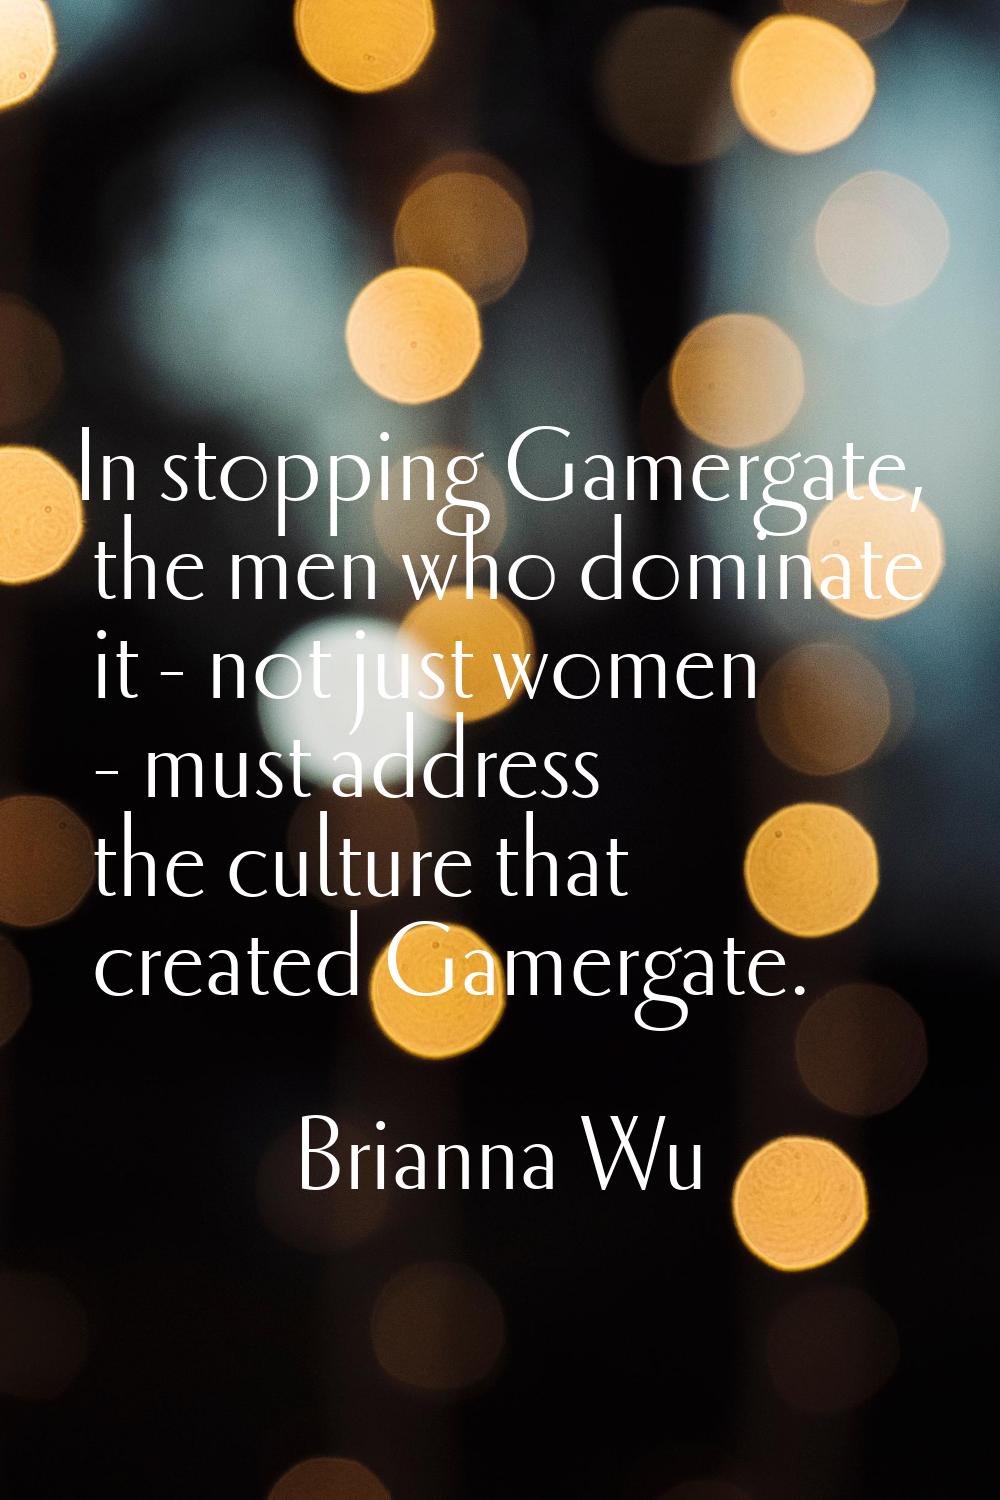 In stopping Gamergate, the men who dominate it - not just women - must address the culture that cre